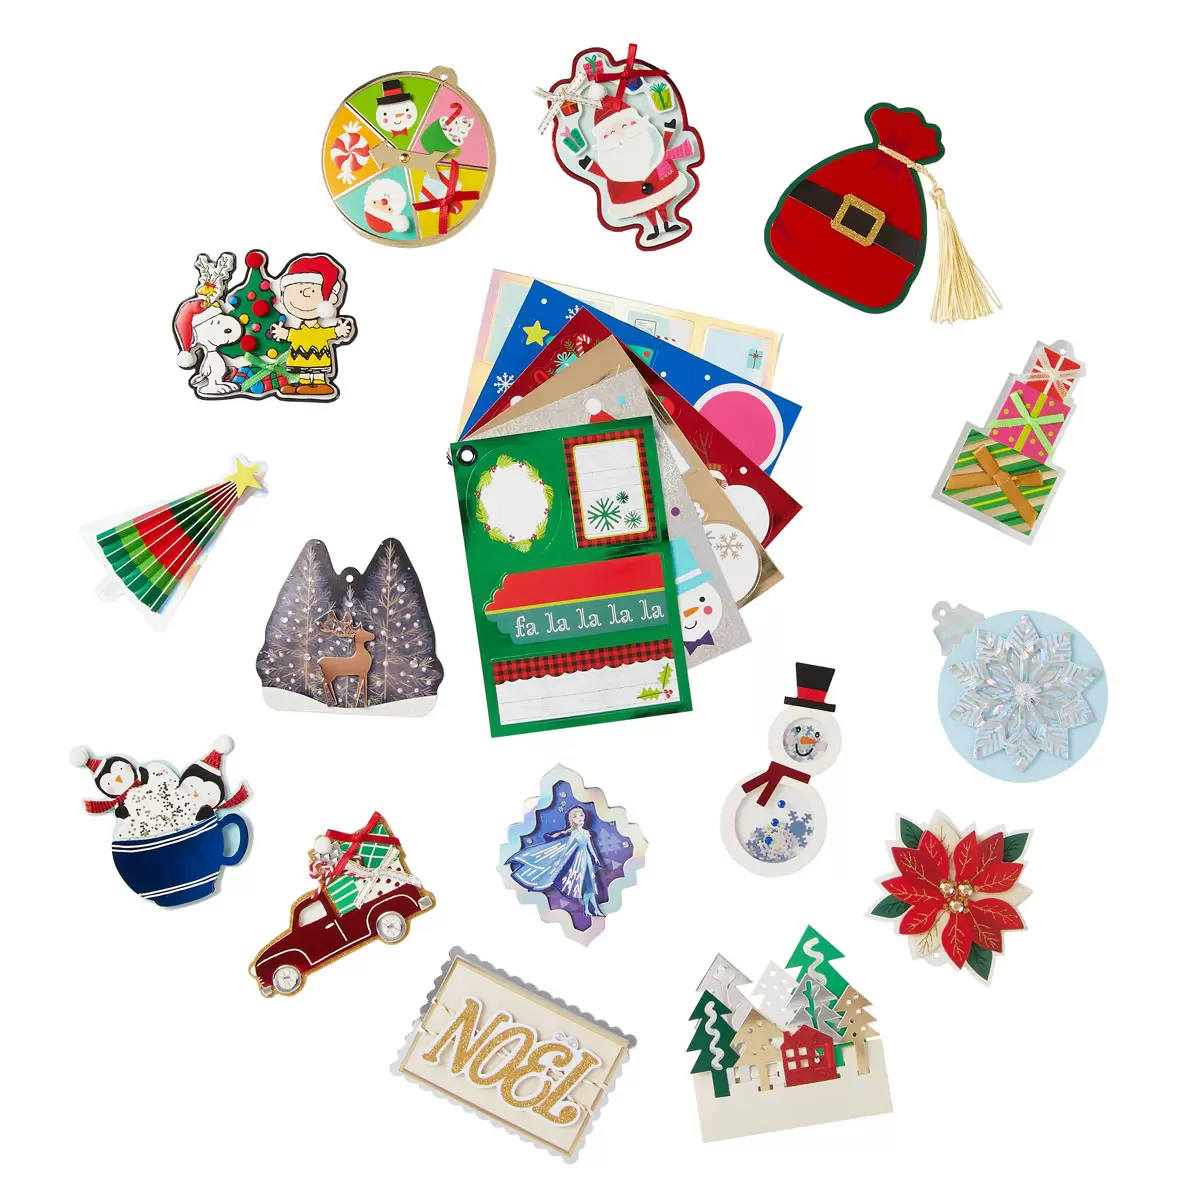 Buy Kirkland Signature Gift Tags Overview Image at Costco.co.uk